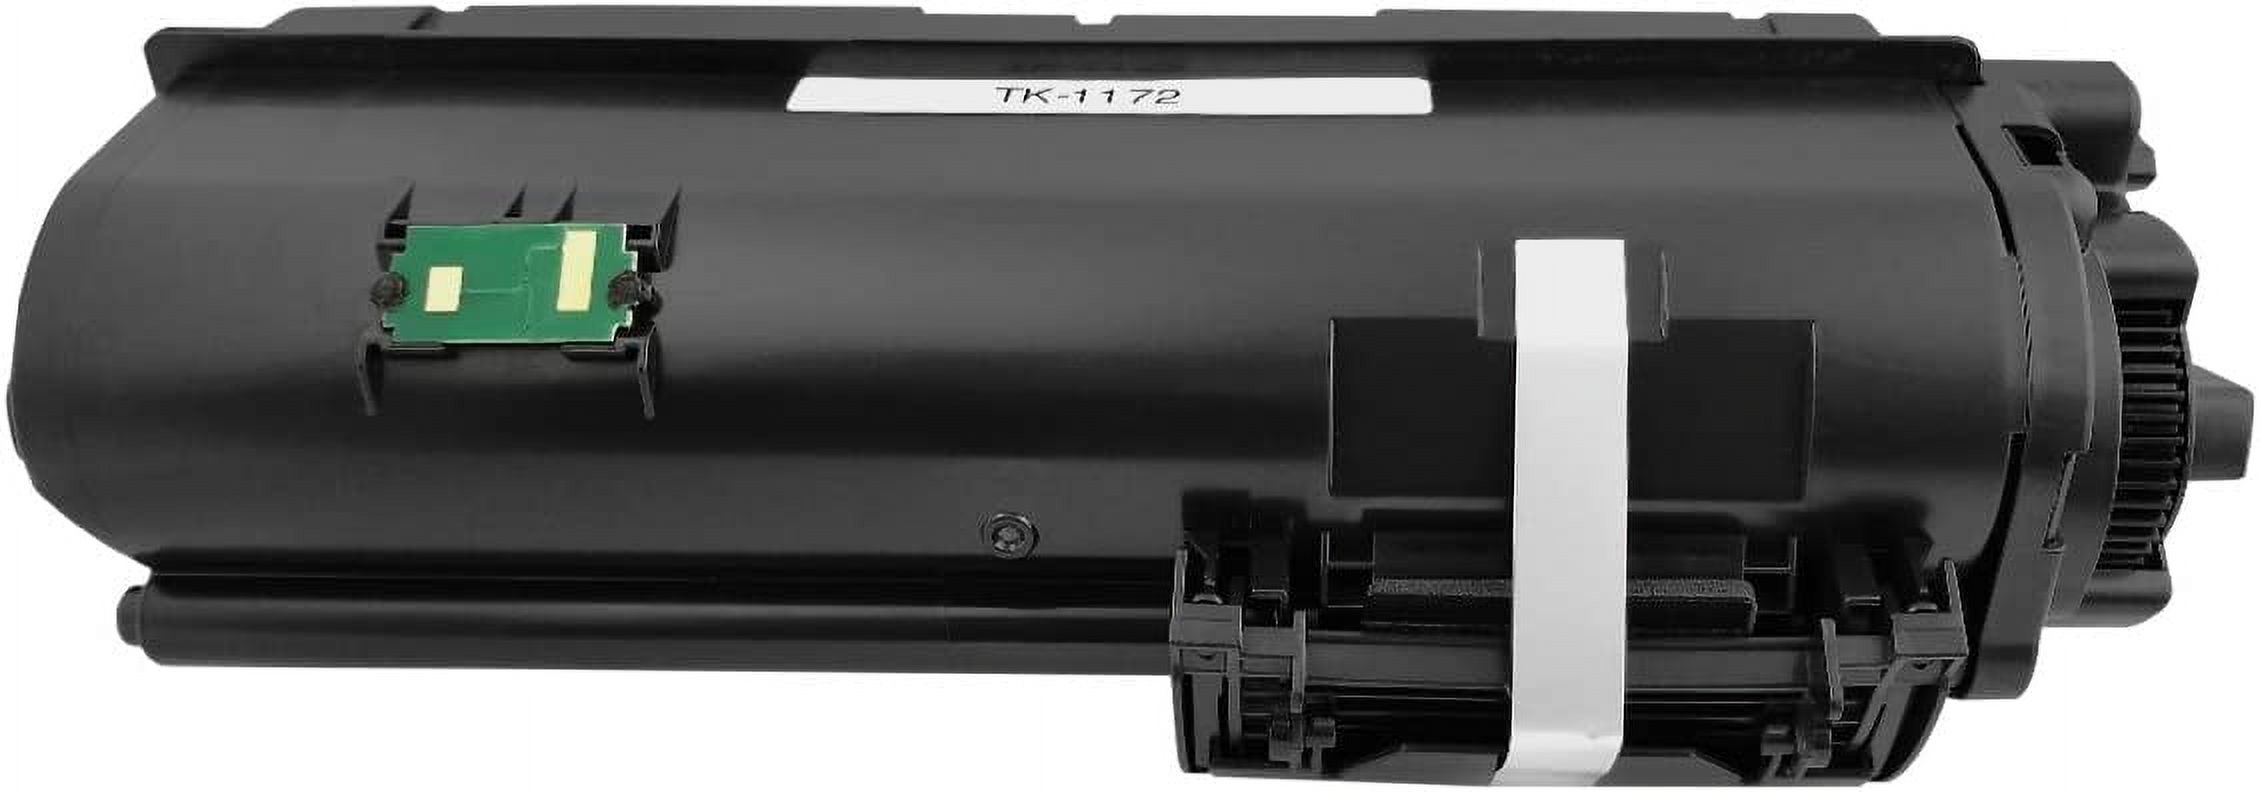 Compatible Toner Cartridge Replacement for TK1172 TK-1172 Black for Kyocera ECOSYS M2040dn M2540dn M2640idw Laser Printers - image 3 of 5